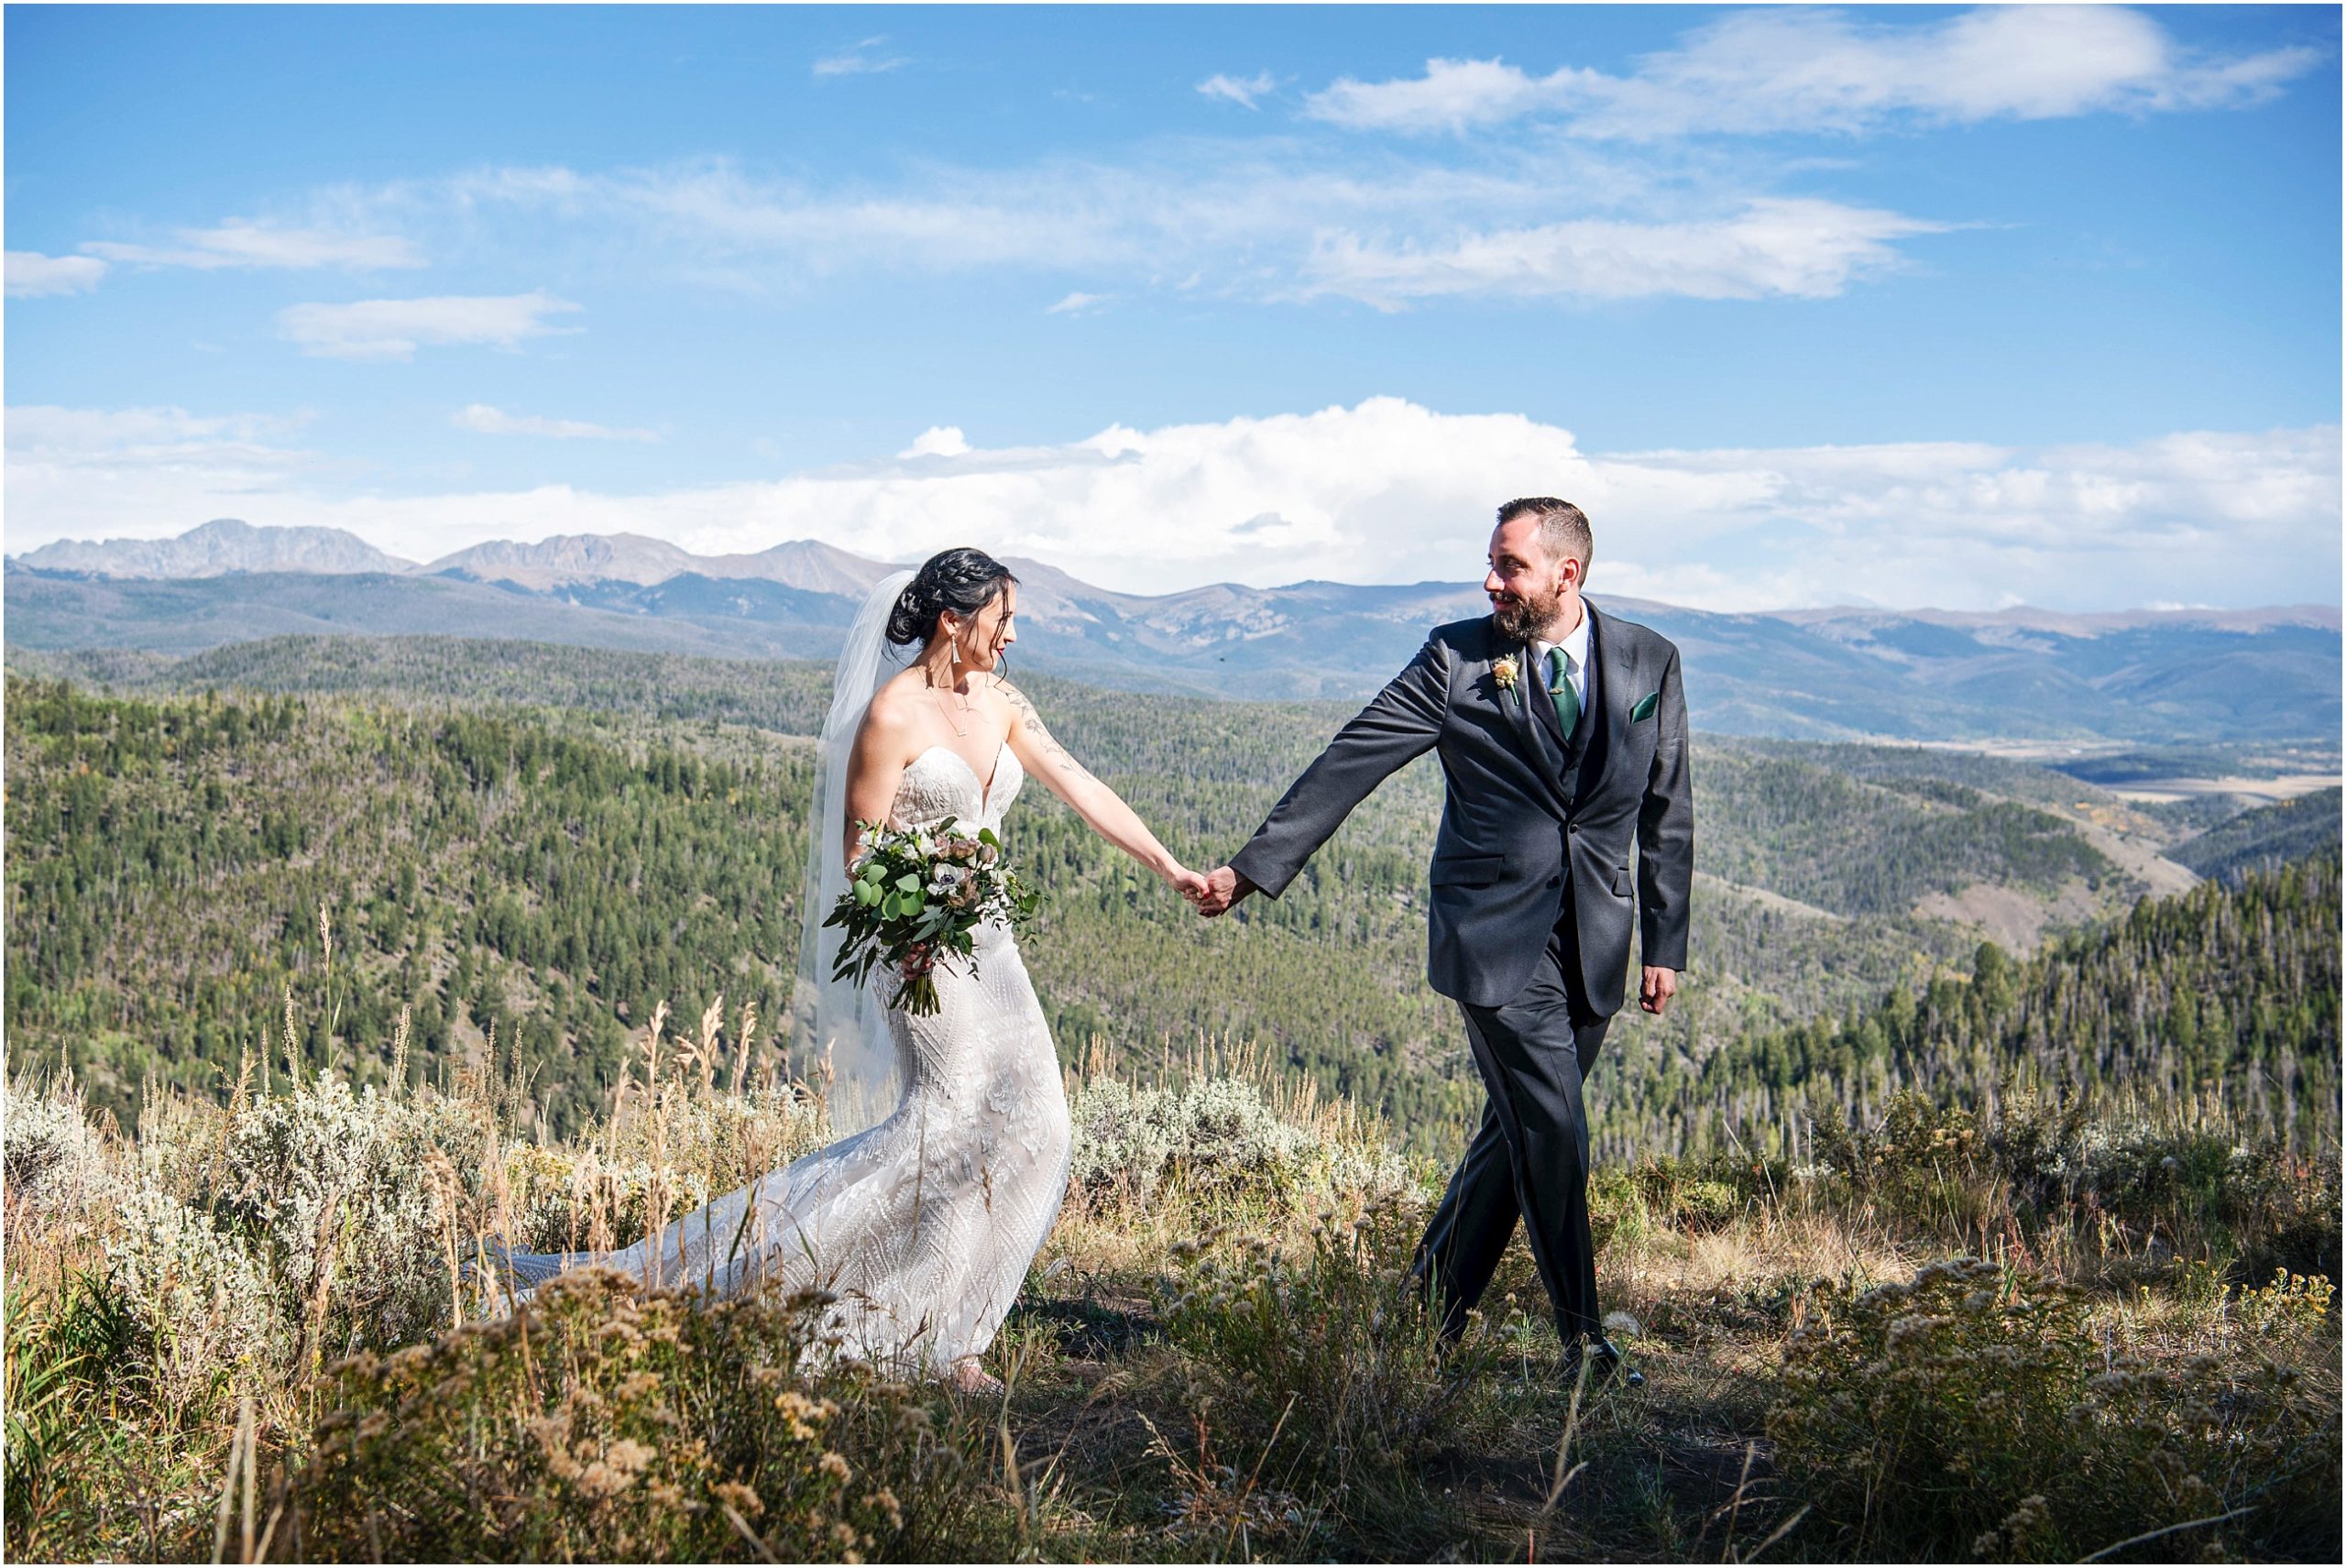 Colorado mountains serve as the perfect backdrop for this outdoor summer wedding ceremony